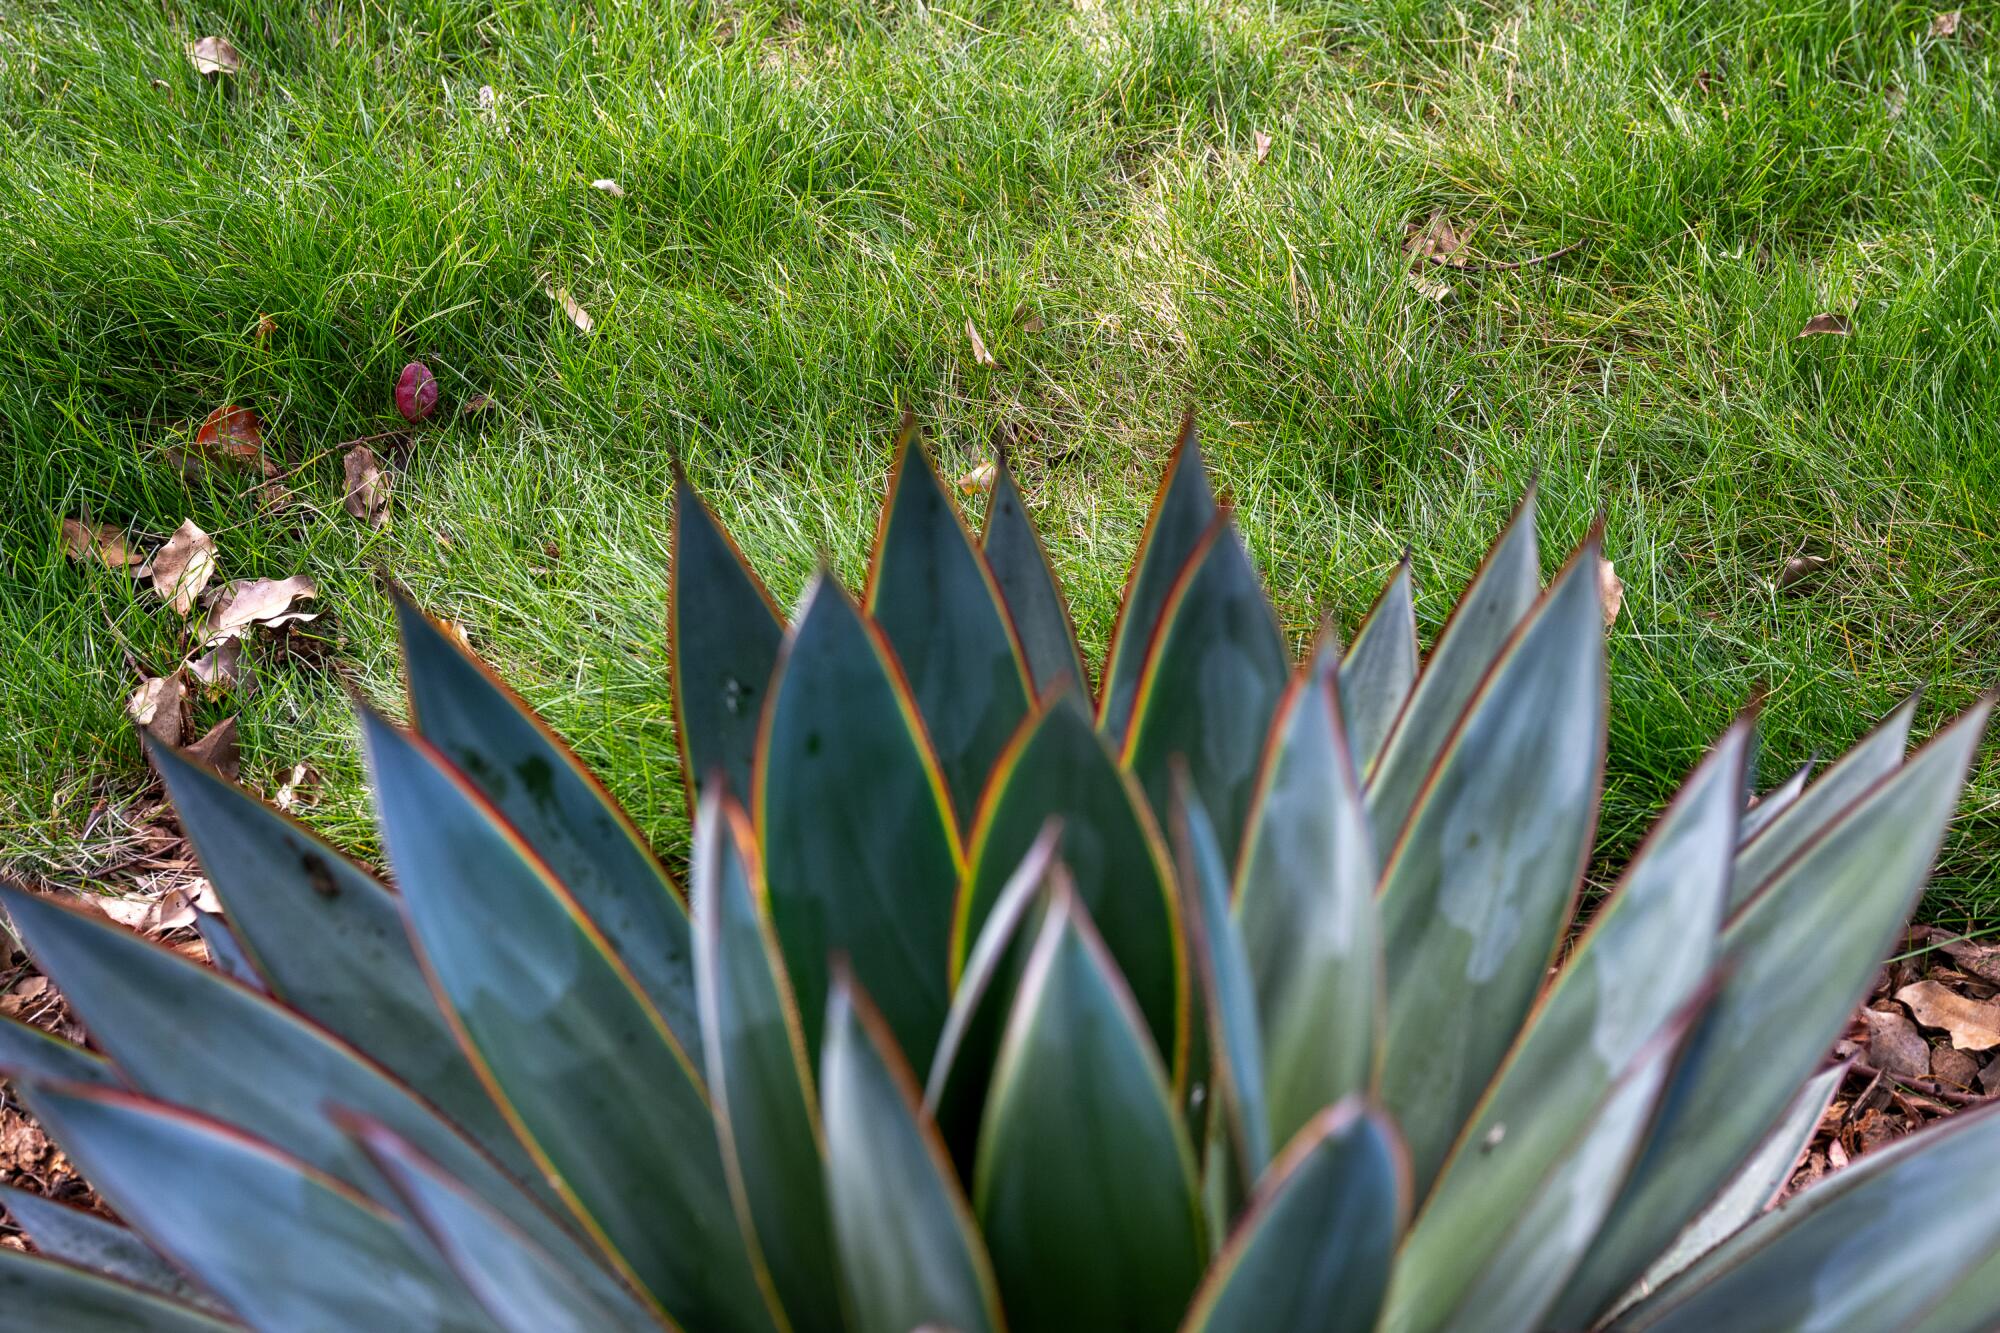 An agave plant in the foreground and long native grass in the background.